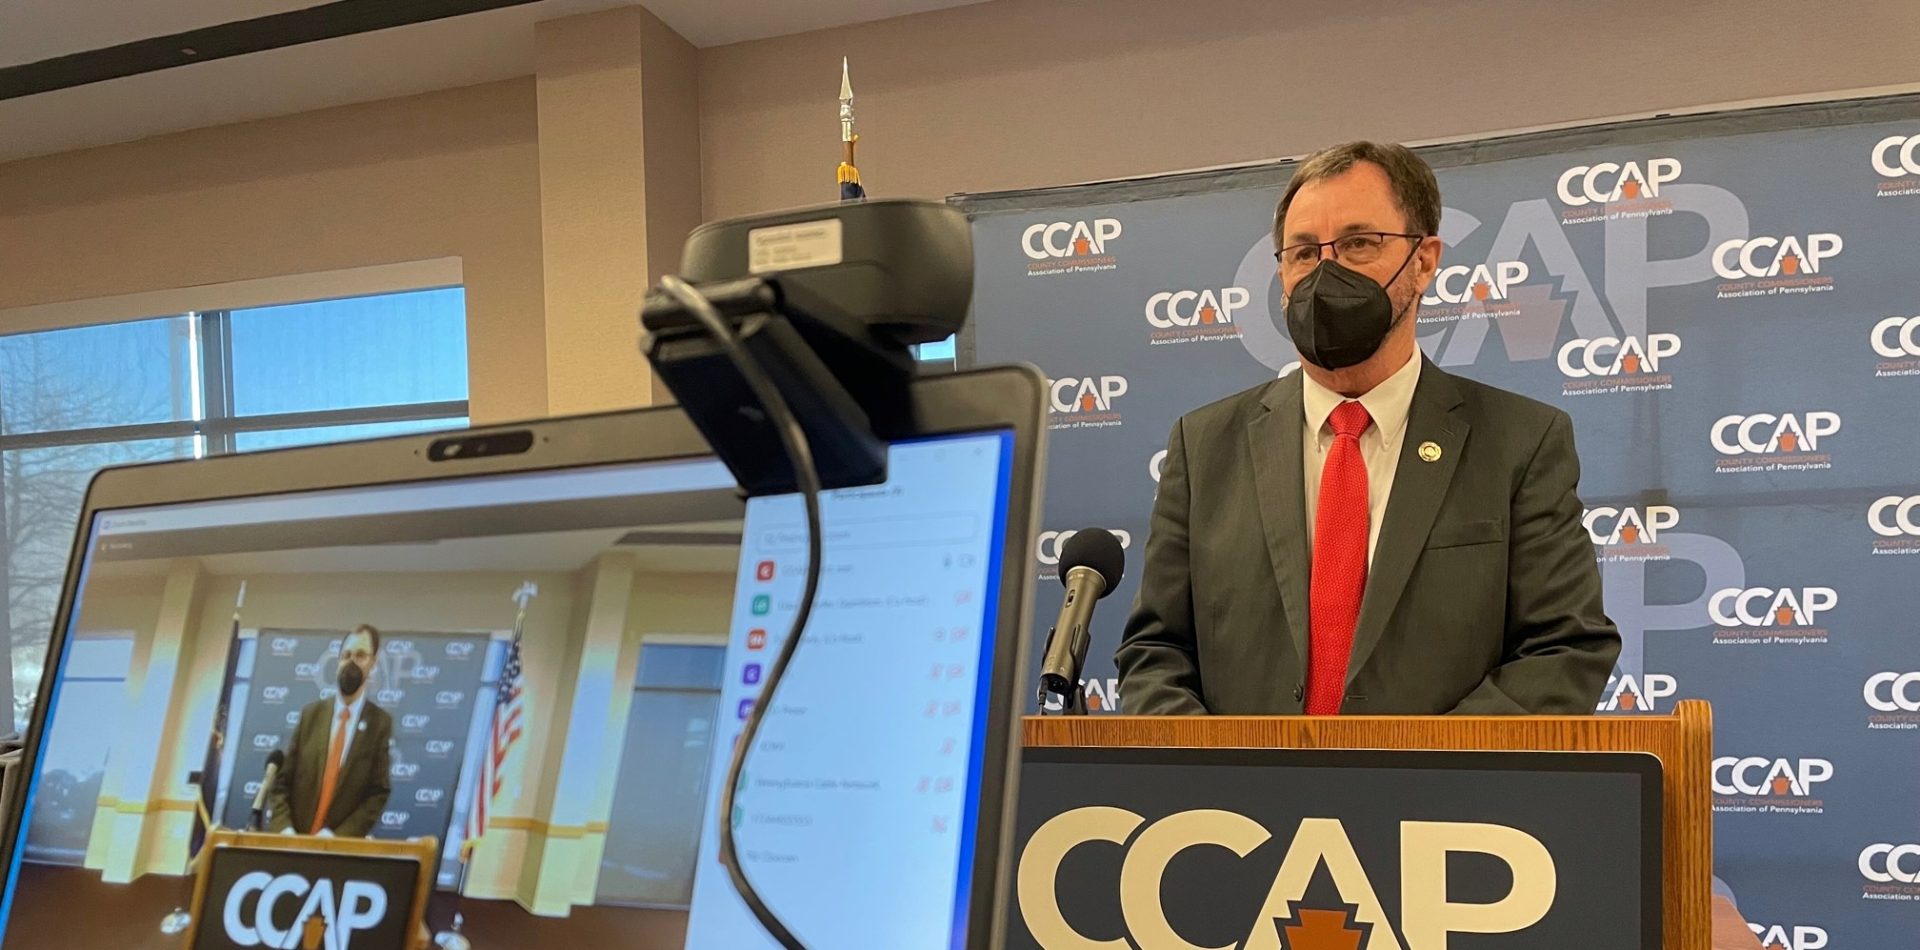 The County Commissioners Association of Pennsylvania gave a virtual press conference to announce their 2022 legislative priorities.